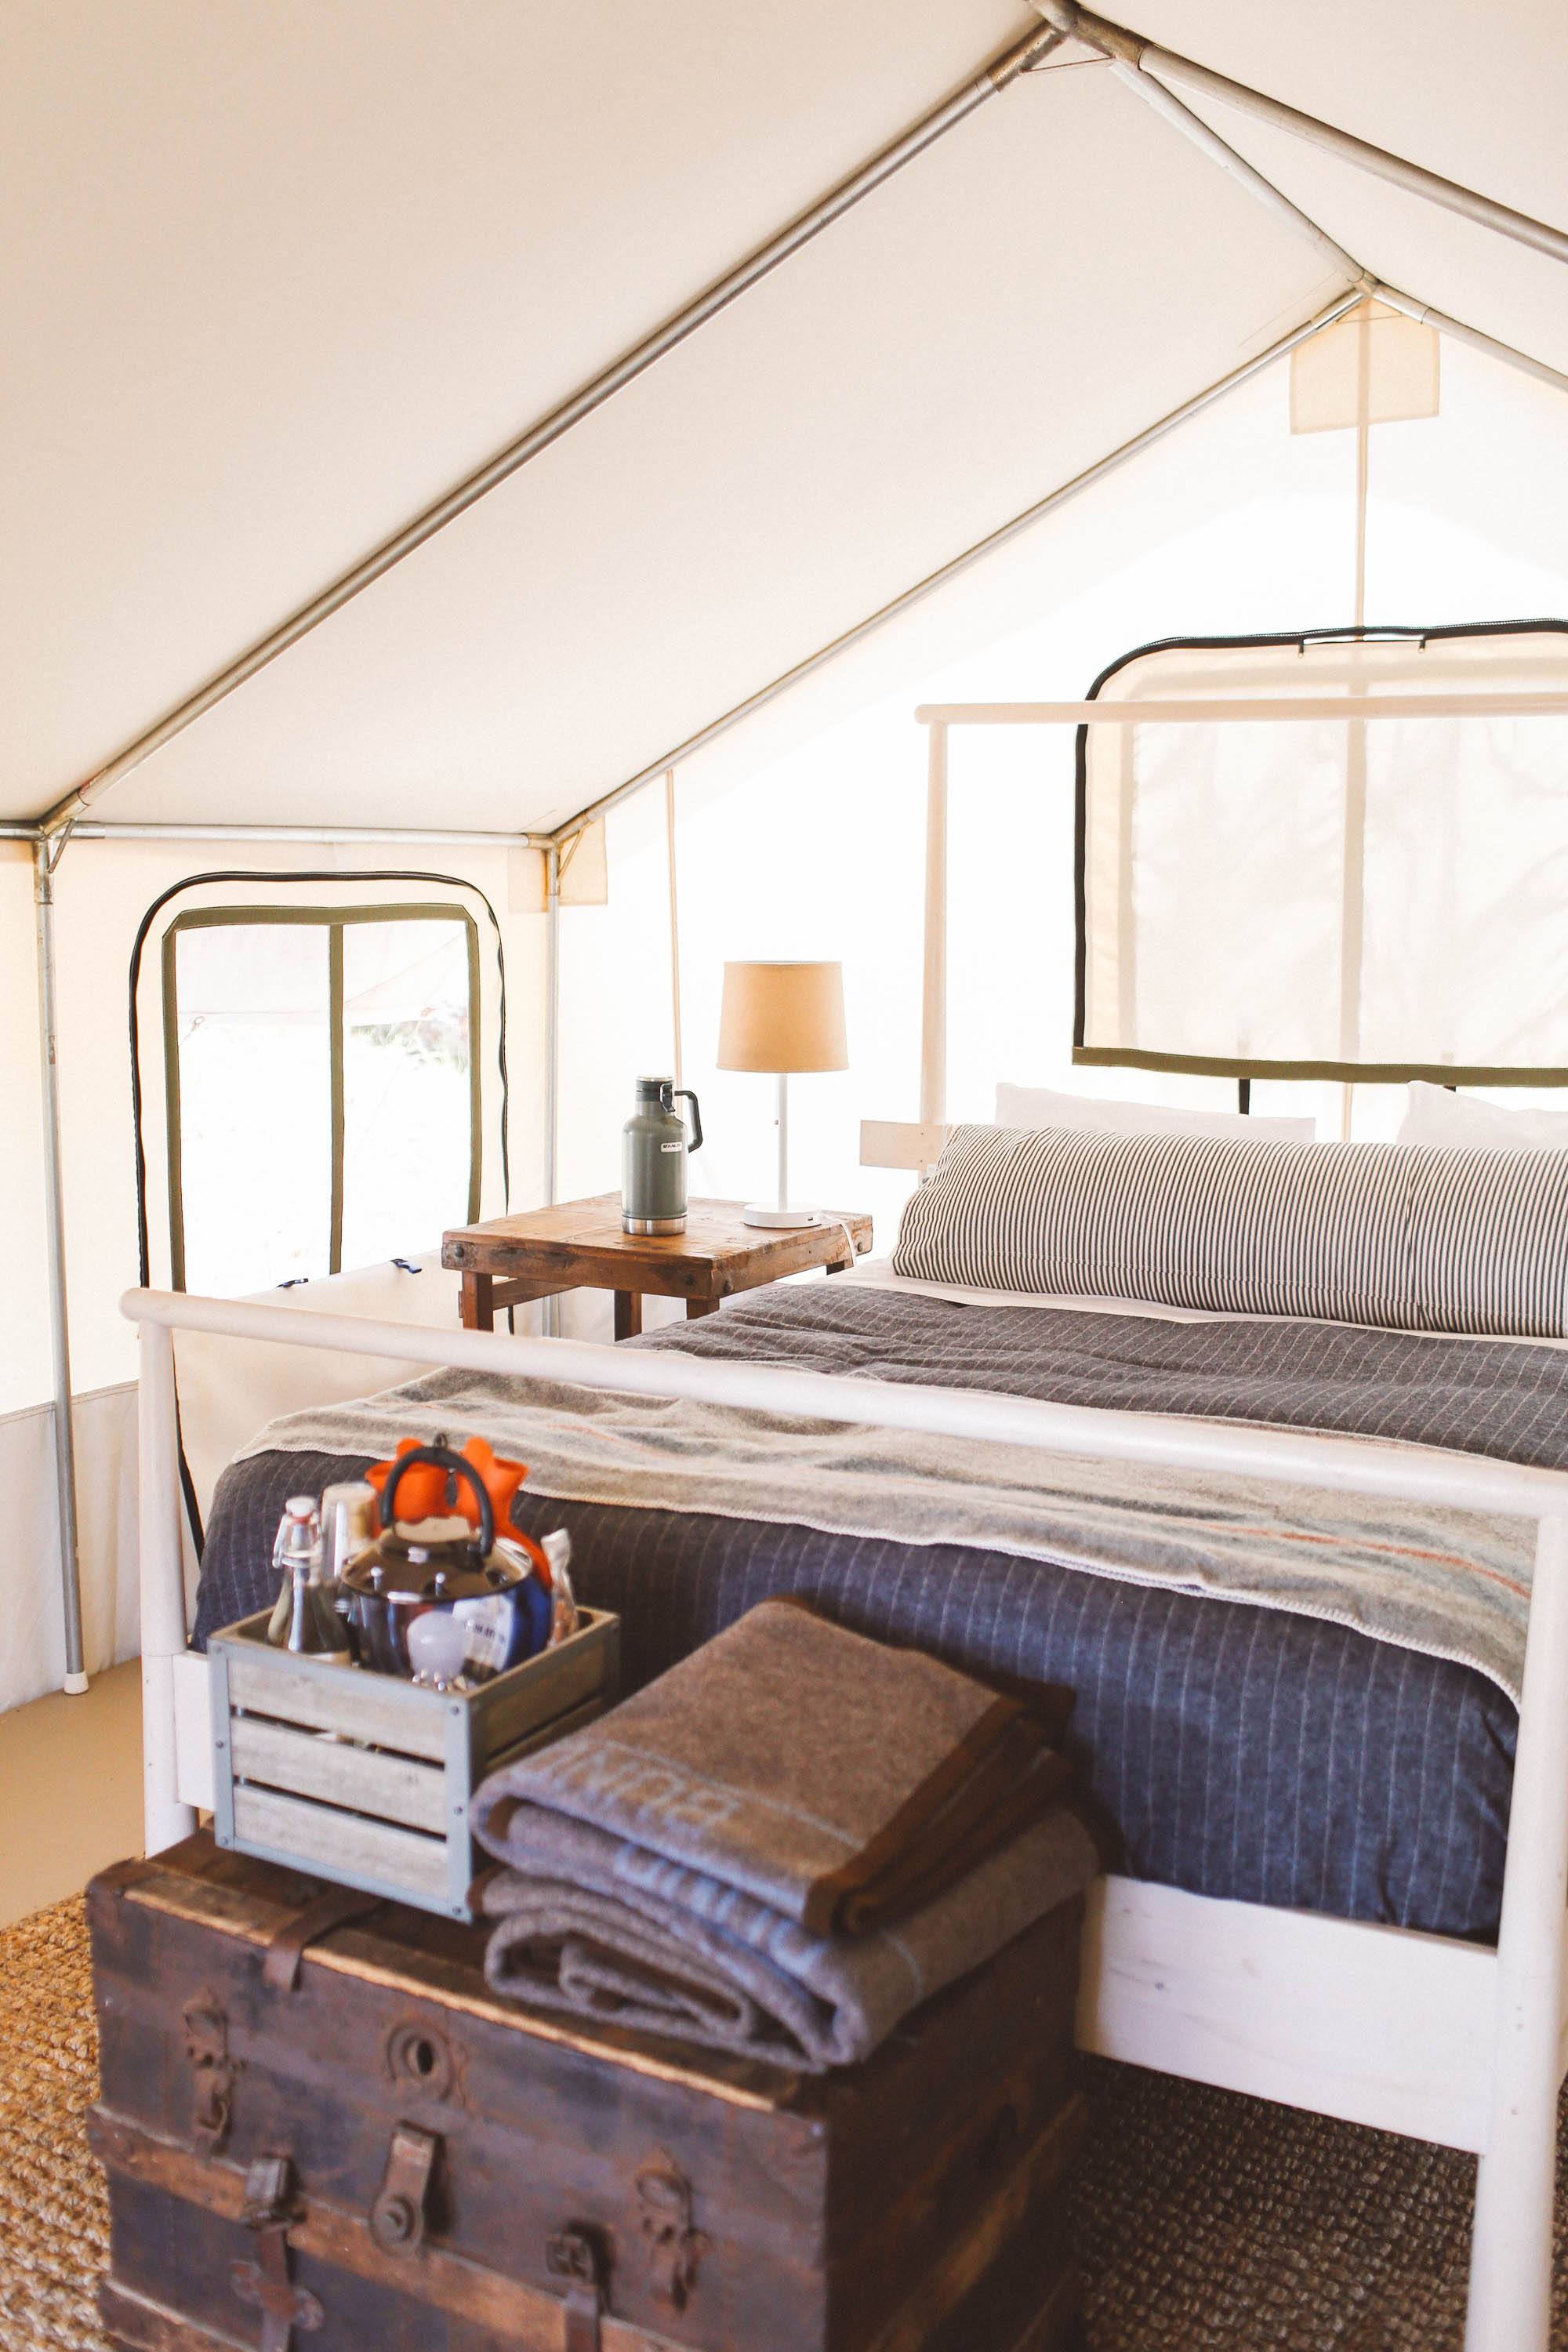 Bed and side tables in tent